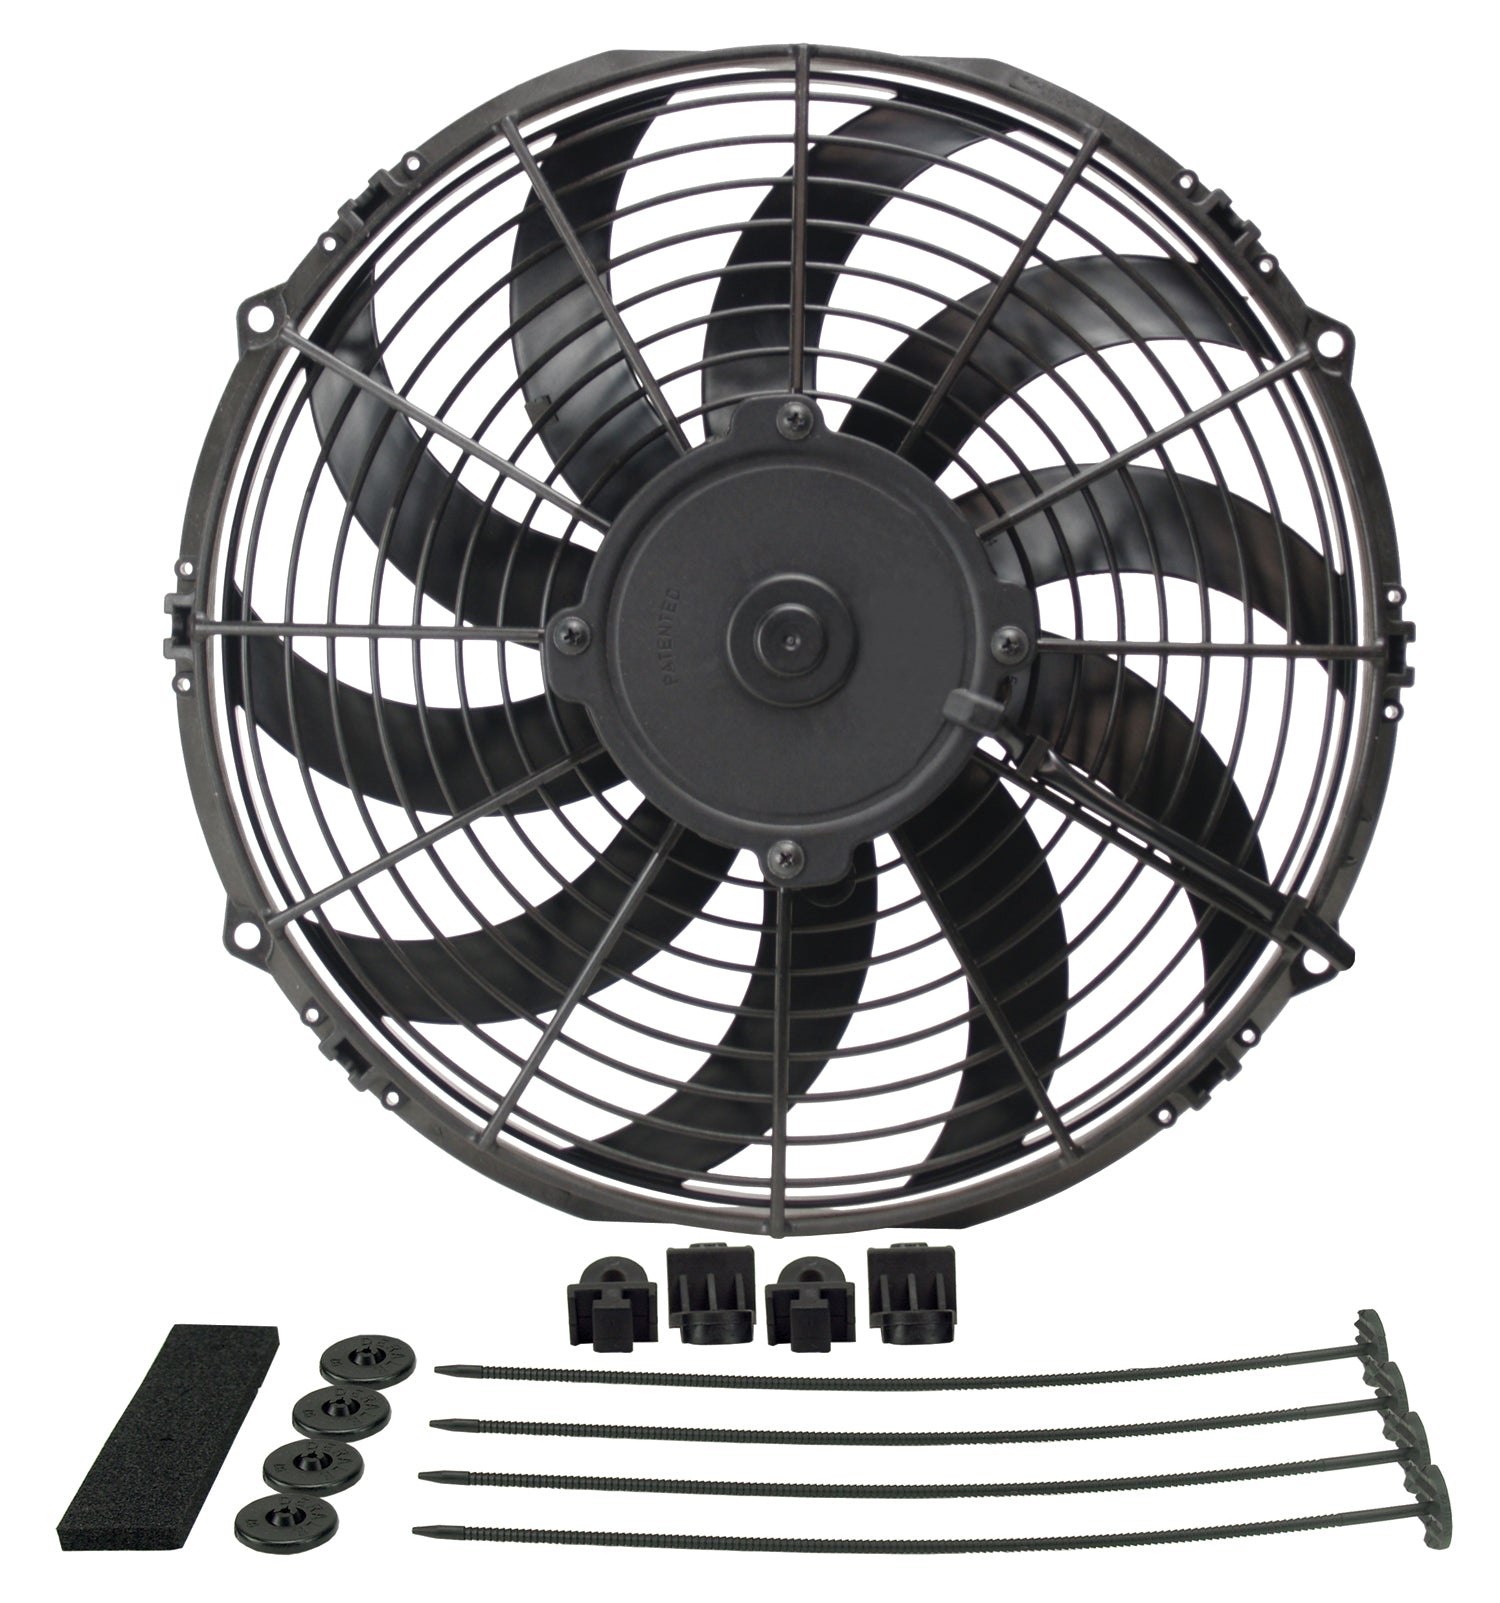 HO EXTREME 12 CURVED BLADE PULLER FAN